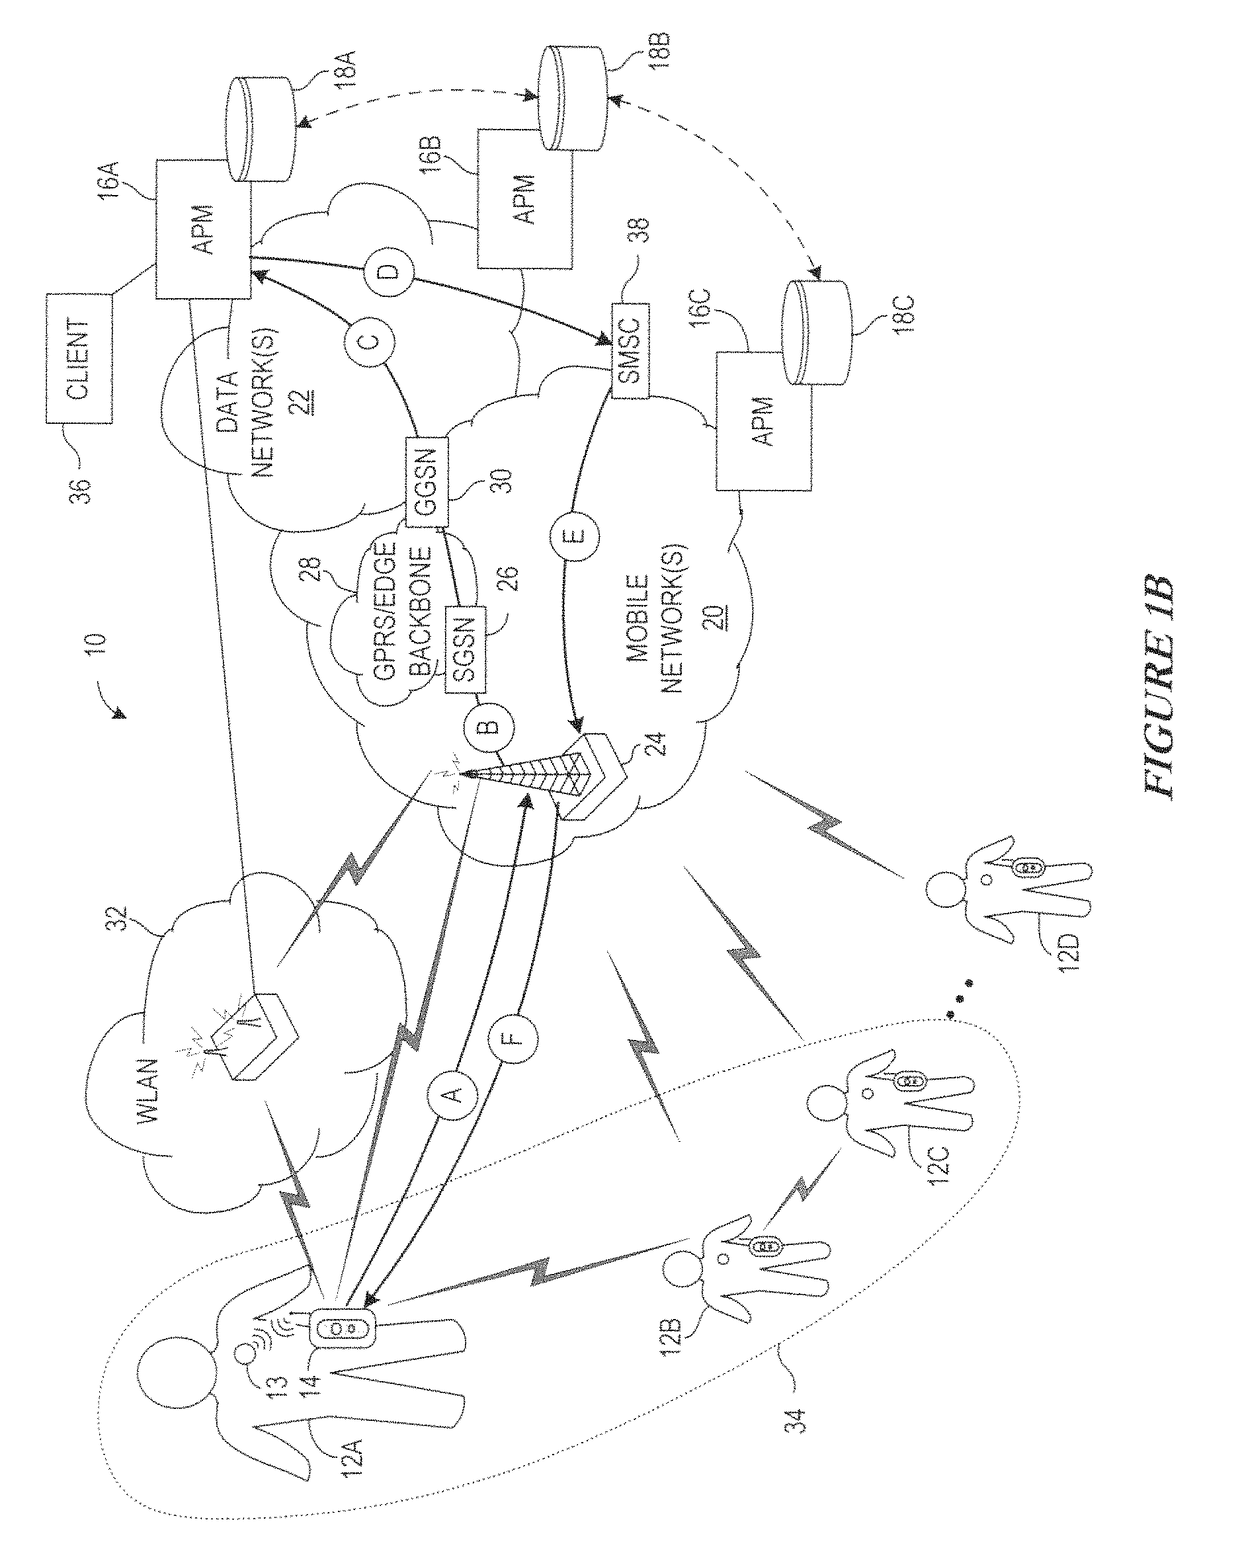 Medical data transport over wireless life critical network employing dynamic communication link mapping